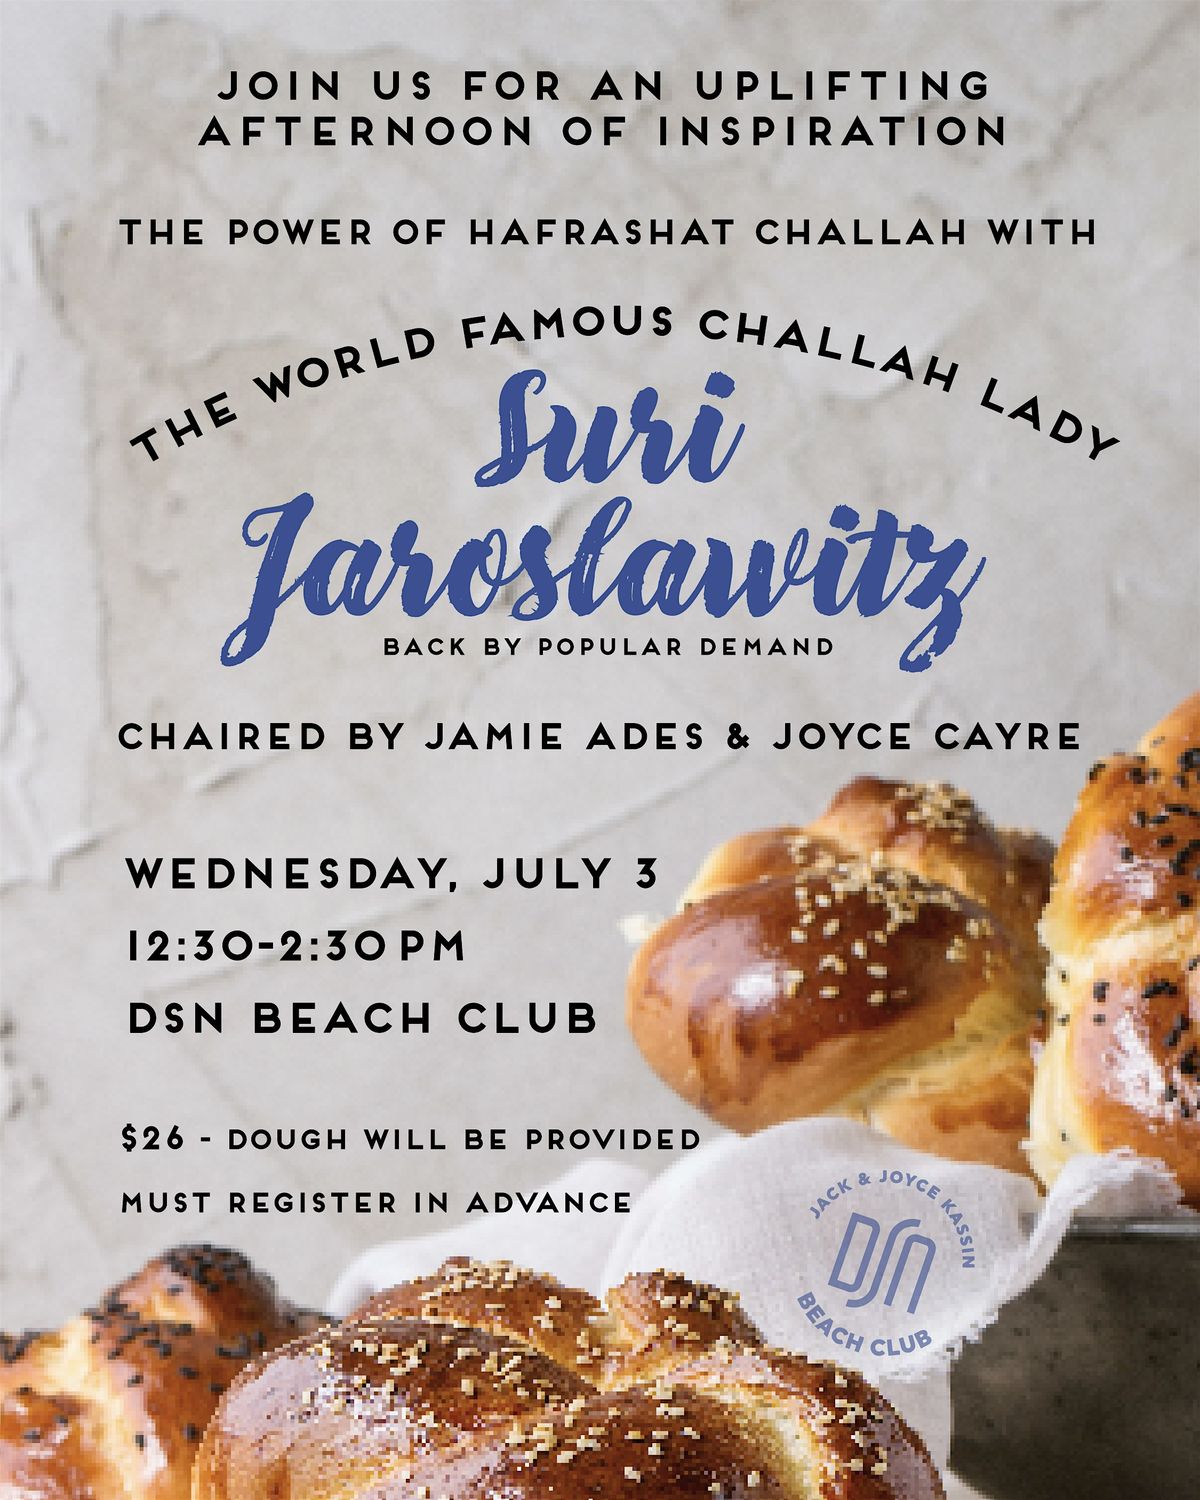 The Power of Hafrashat Challah with the World Famous Challah Lady Suri J